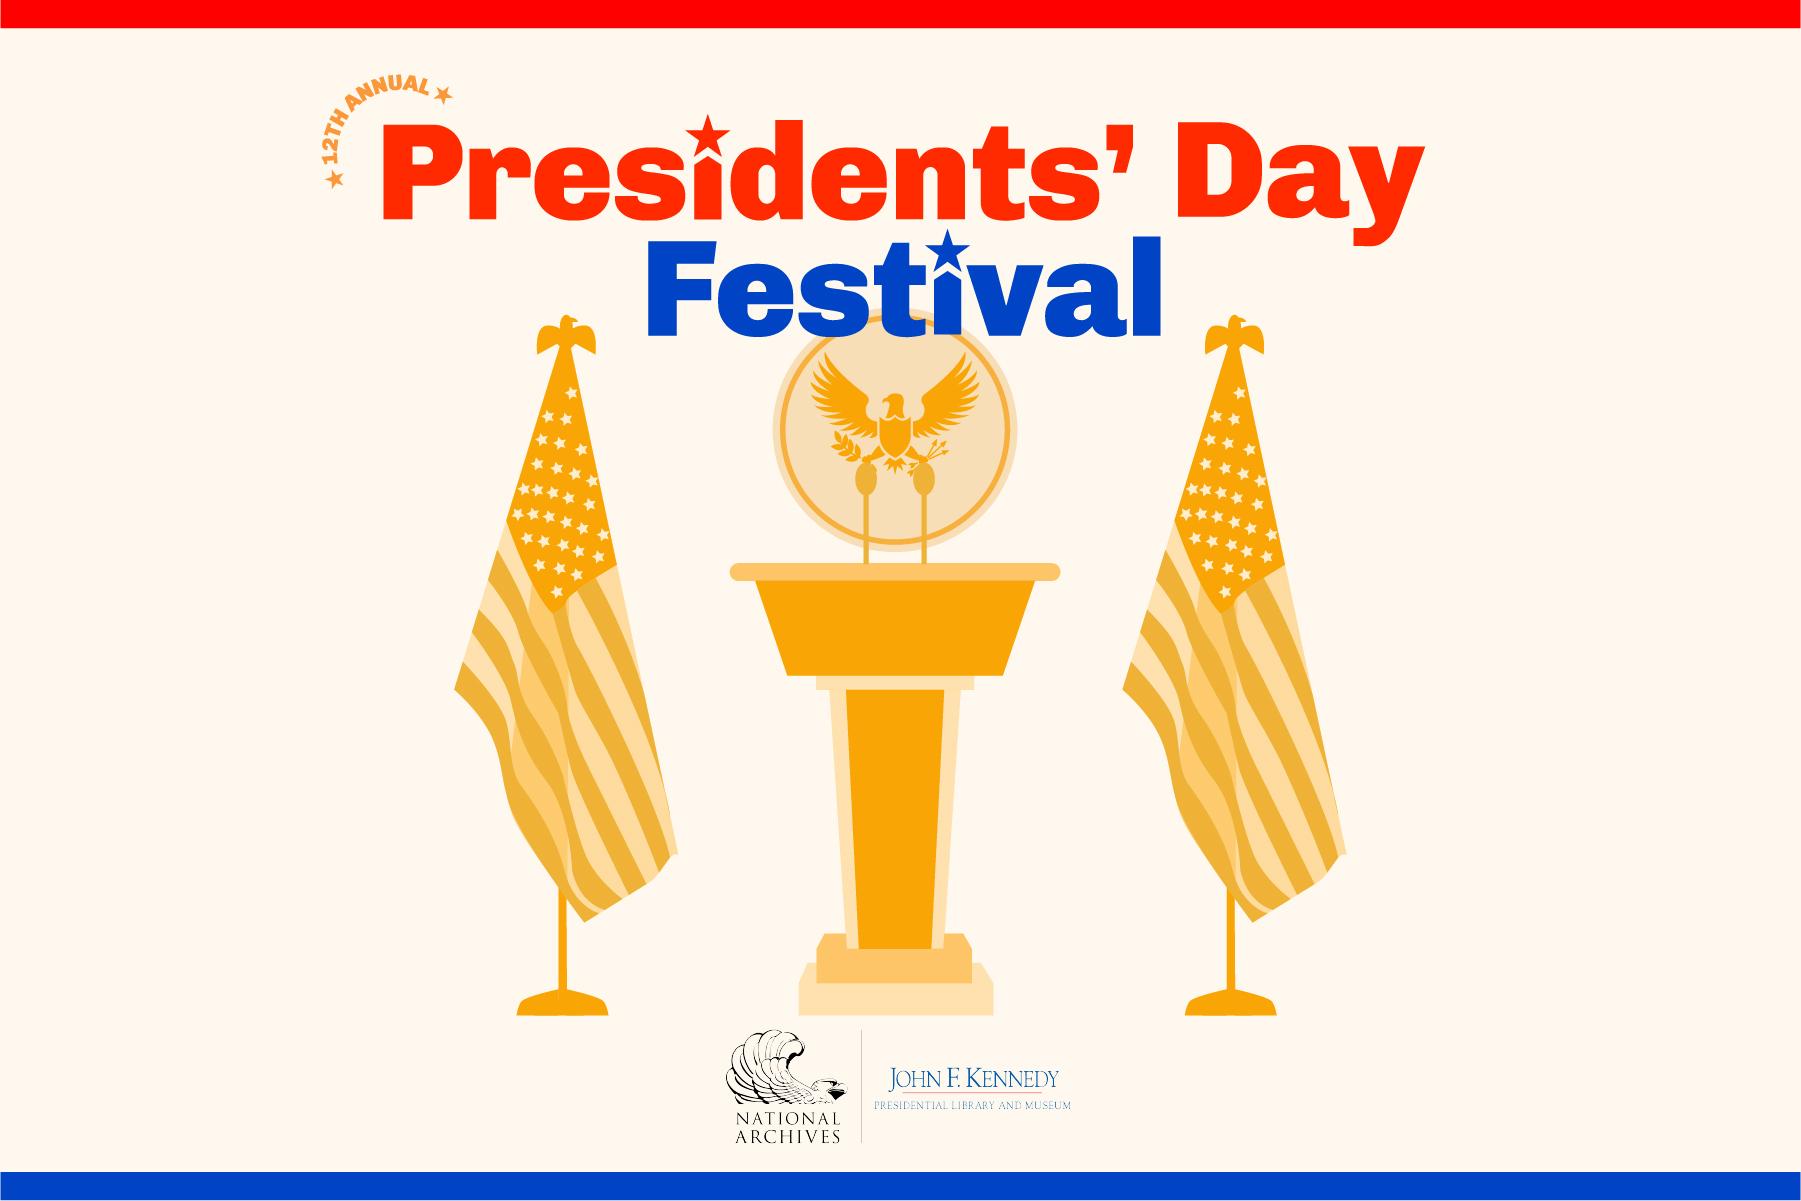 12th Annual Presidents' Day Festival. An illustration of a podium in front of a presidential seal with one American flag on each side. Logos of the National Archives and Records Administration and the JFK Library at the bottom.